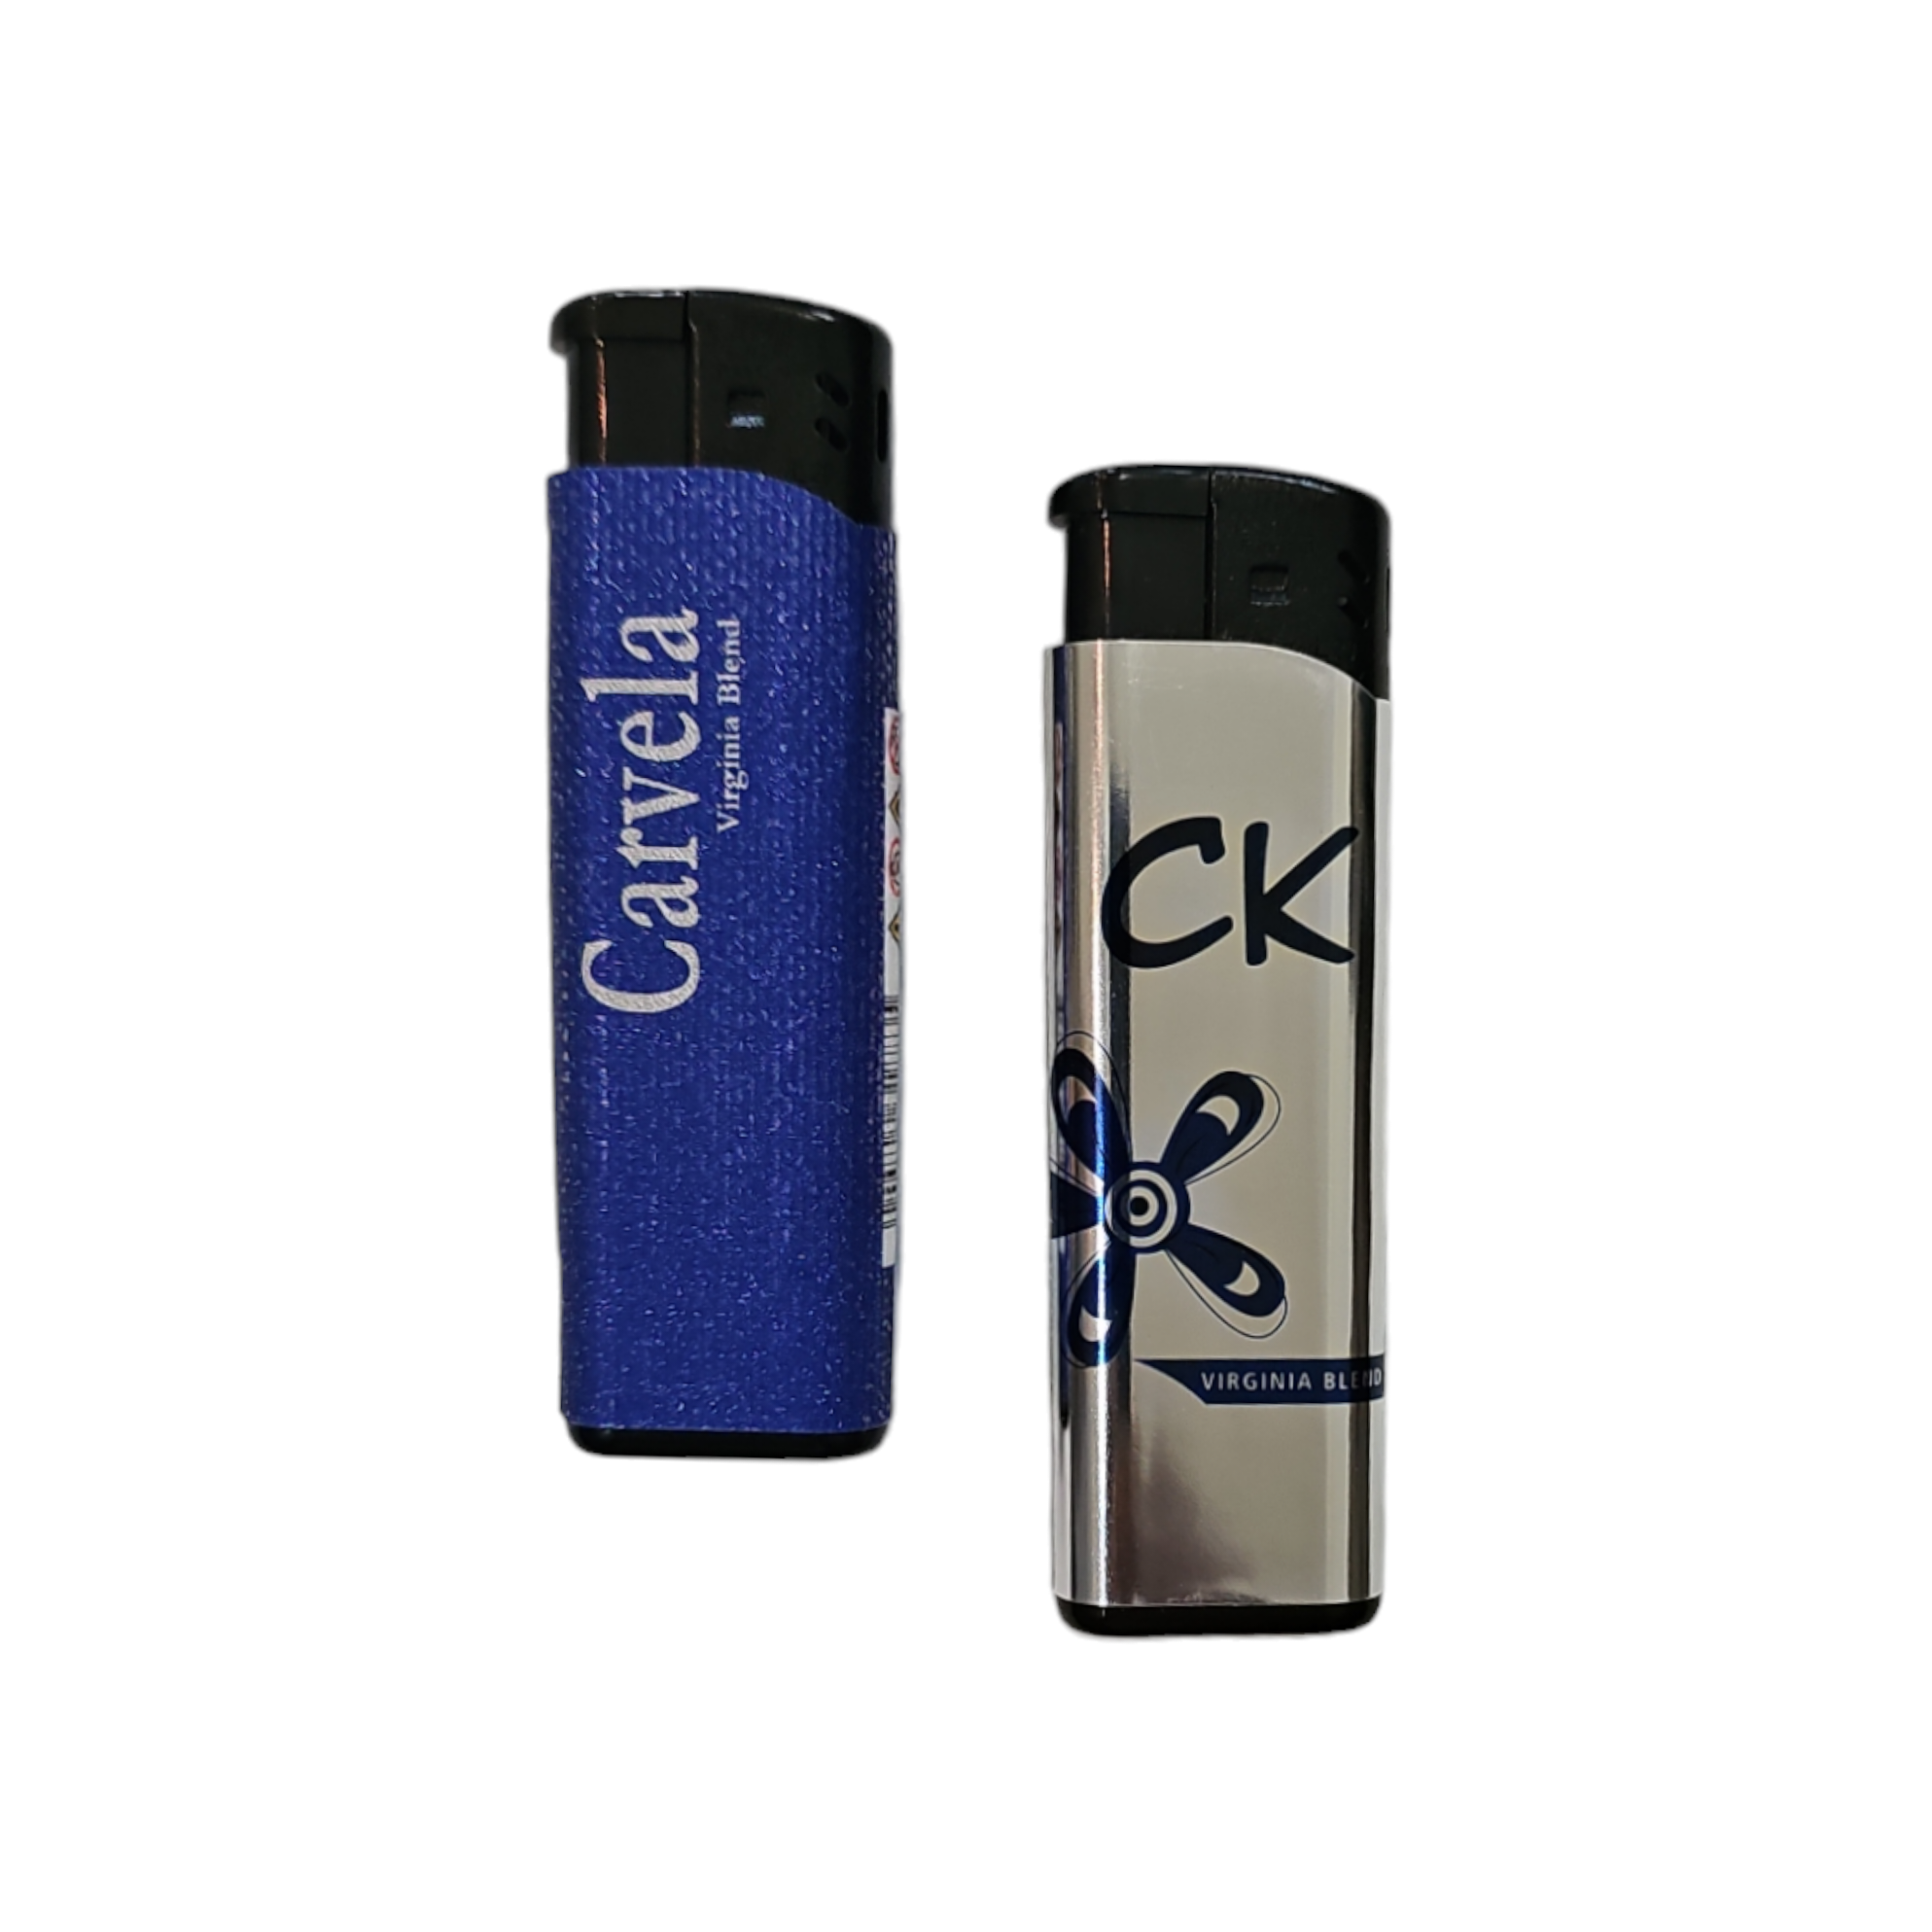 Carvella Electronic Lighter Refillable